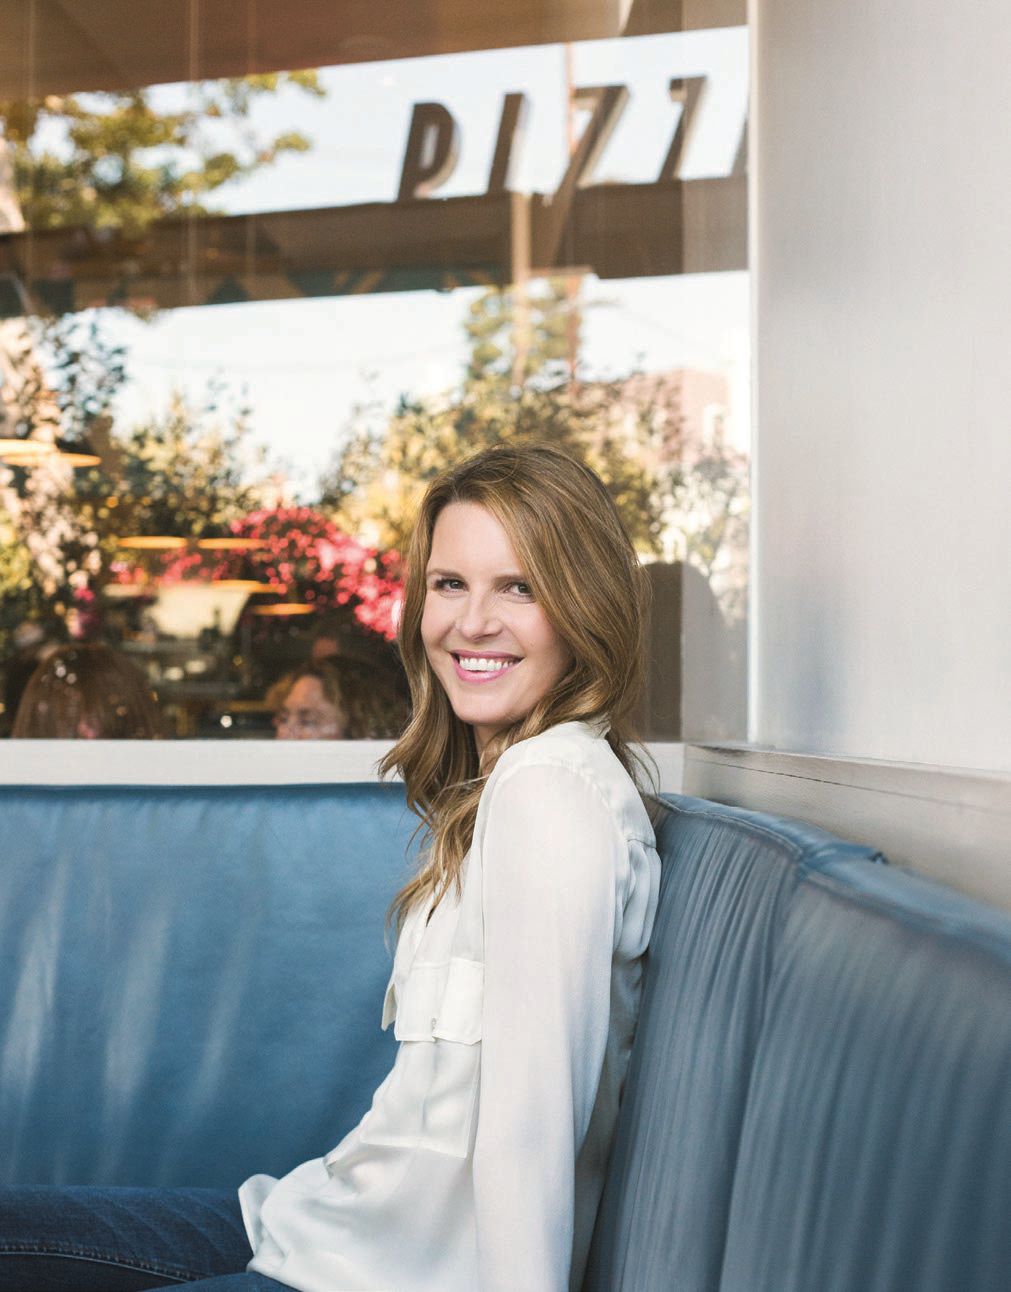 Candace Nelson’s Cali-based pizza eatery has made its way to Dallas PHOTO COURTESY OF BRAND